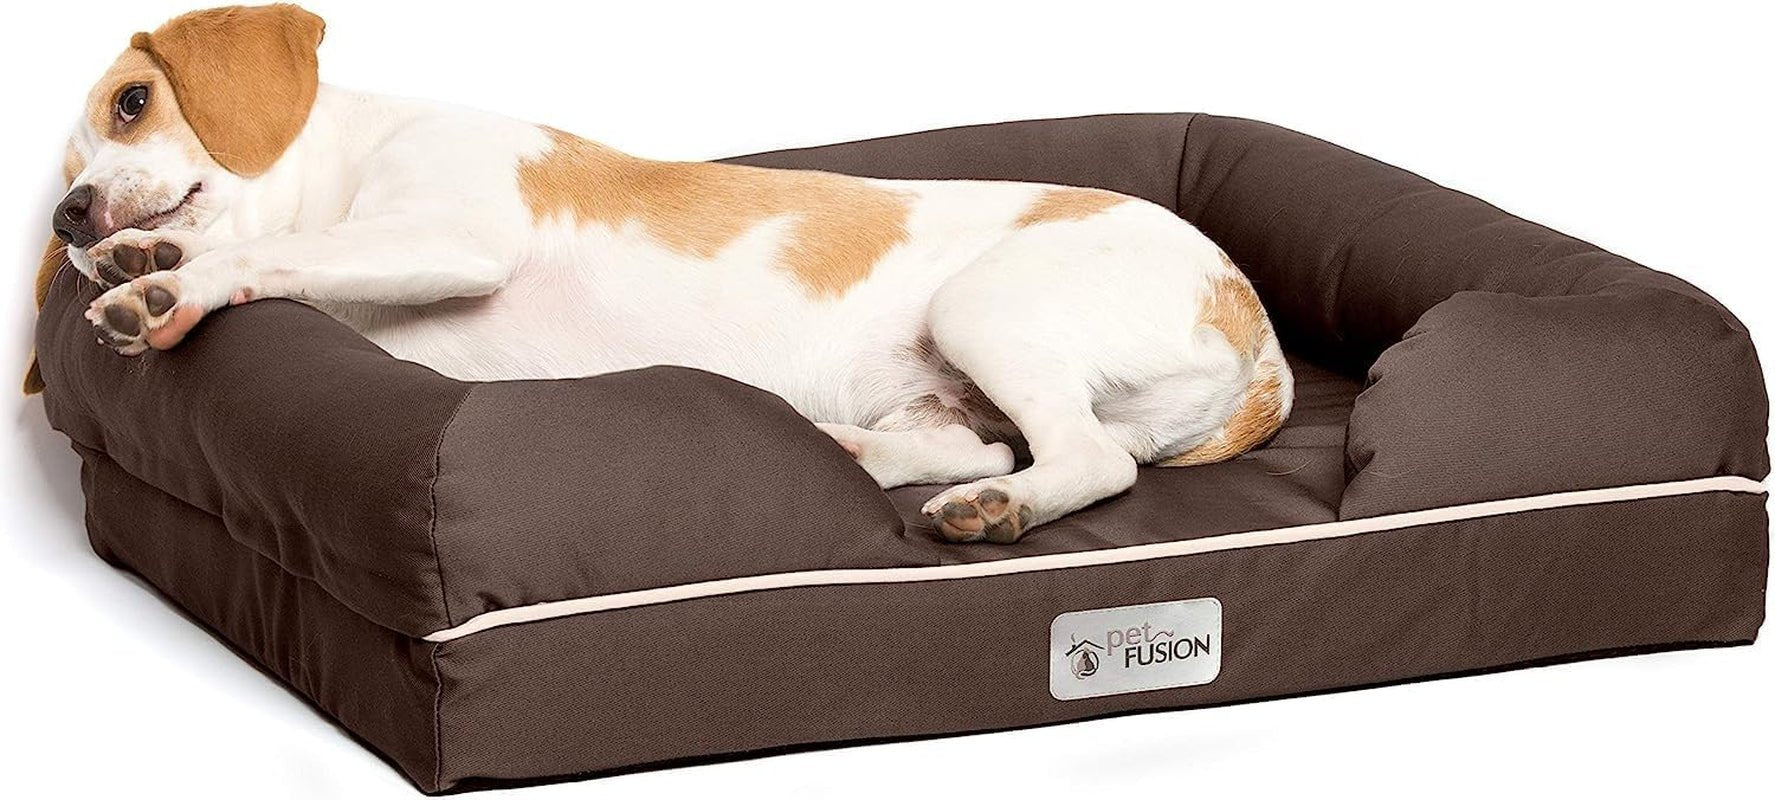 Petfusion Ultimate Dog Bed, Orthopedic Memory Foam, Multiple Sizes/Colors, Medium Firmness Pillow, Waterproof Liner, YKK Zippers, Breathable 35% Cotton Cover, 1Yr. Warranty, Small (25X20"), Brown - PETGS